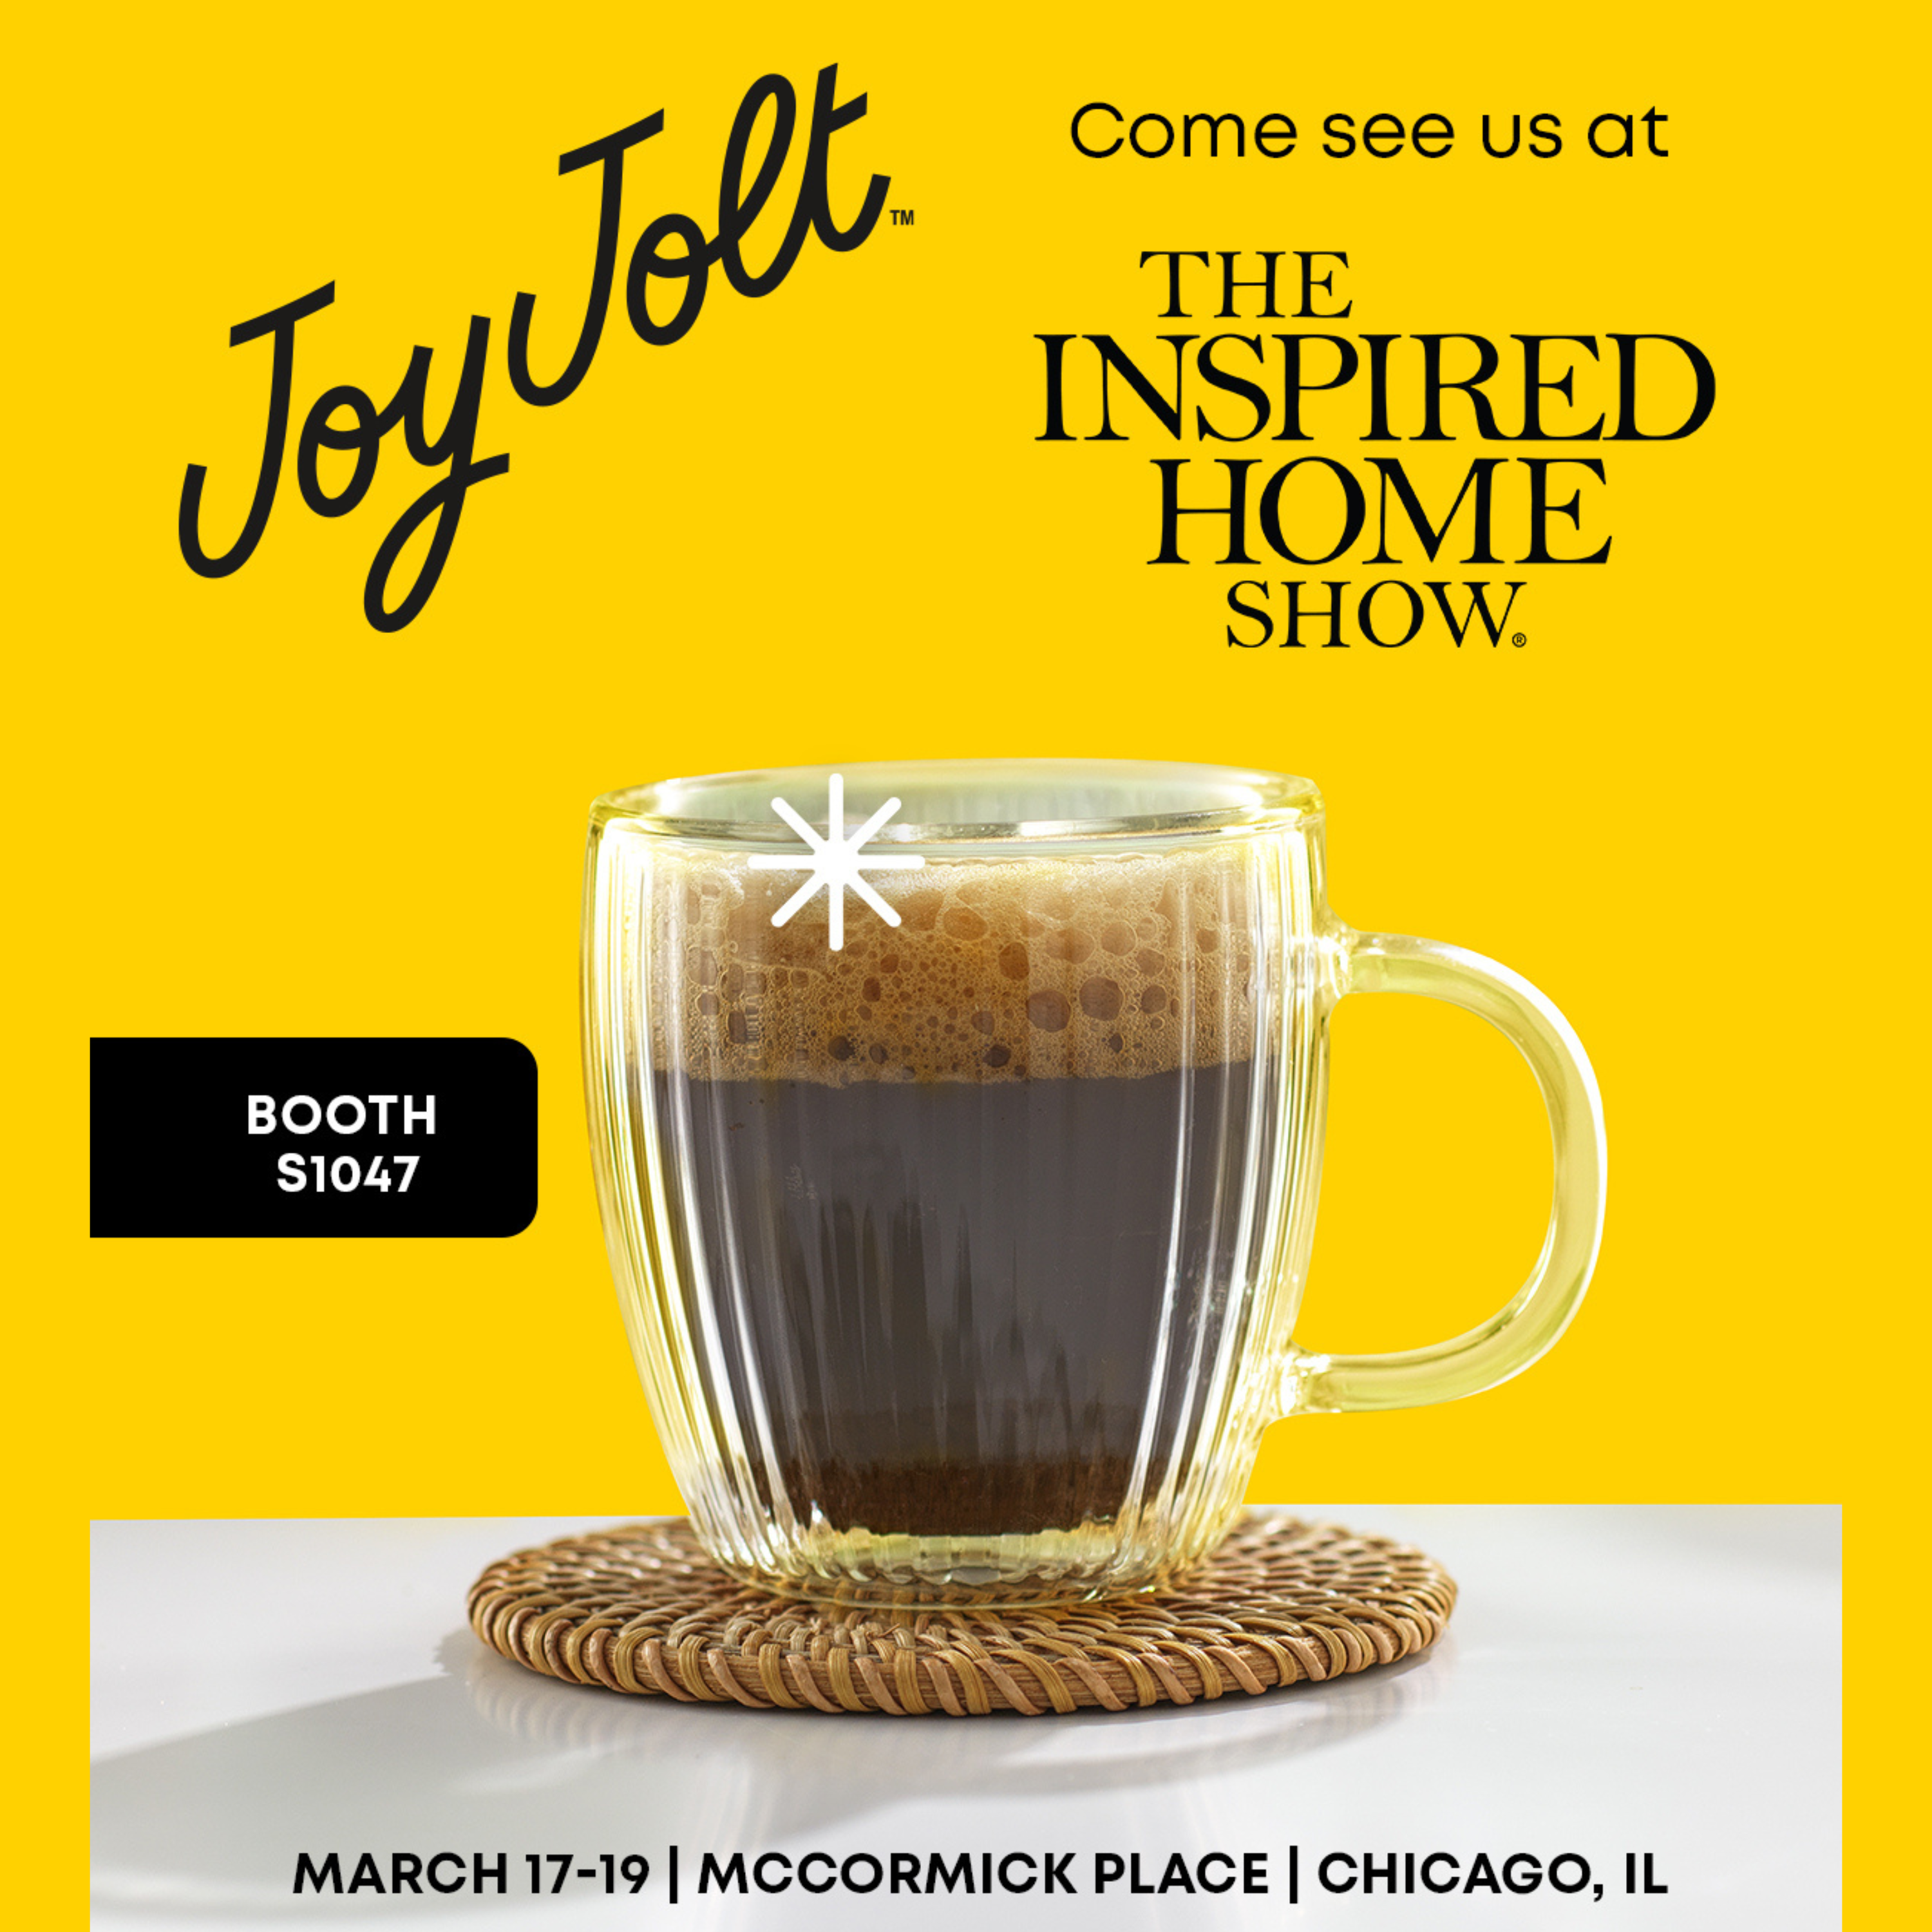 JoyJolt Releases New Homeware Collections in Expanded Categories at the Inspired Home Show